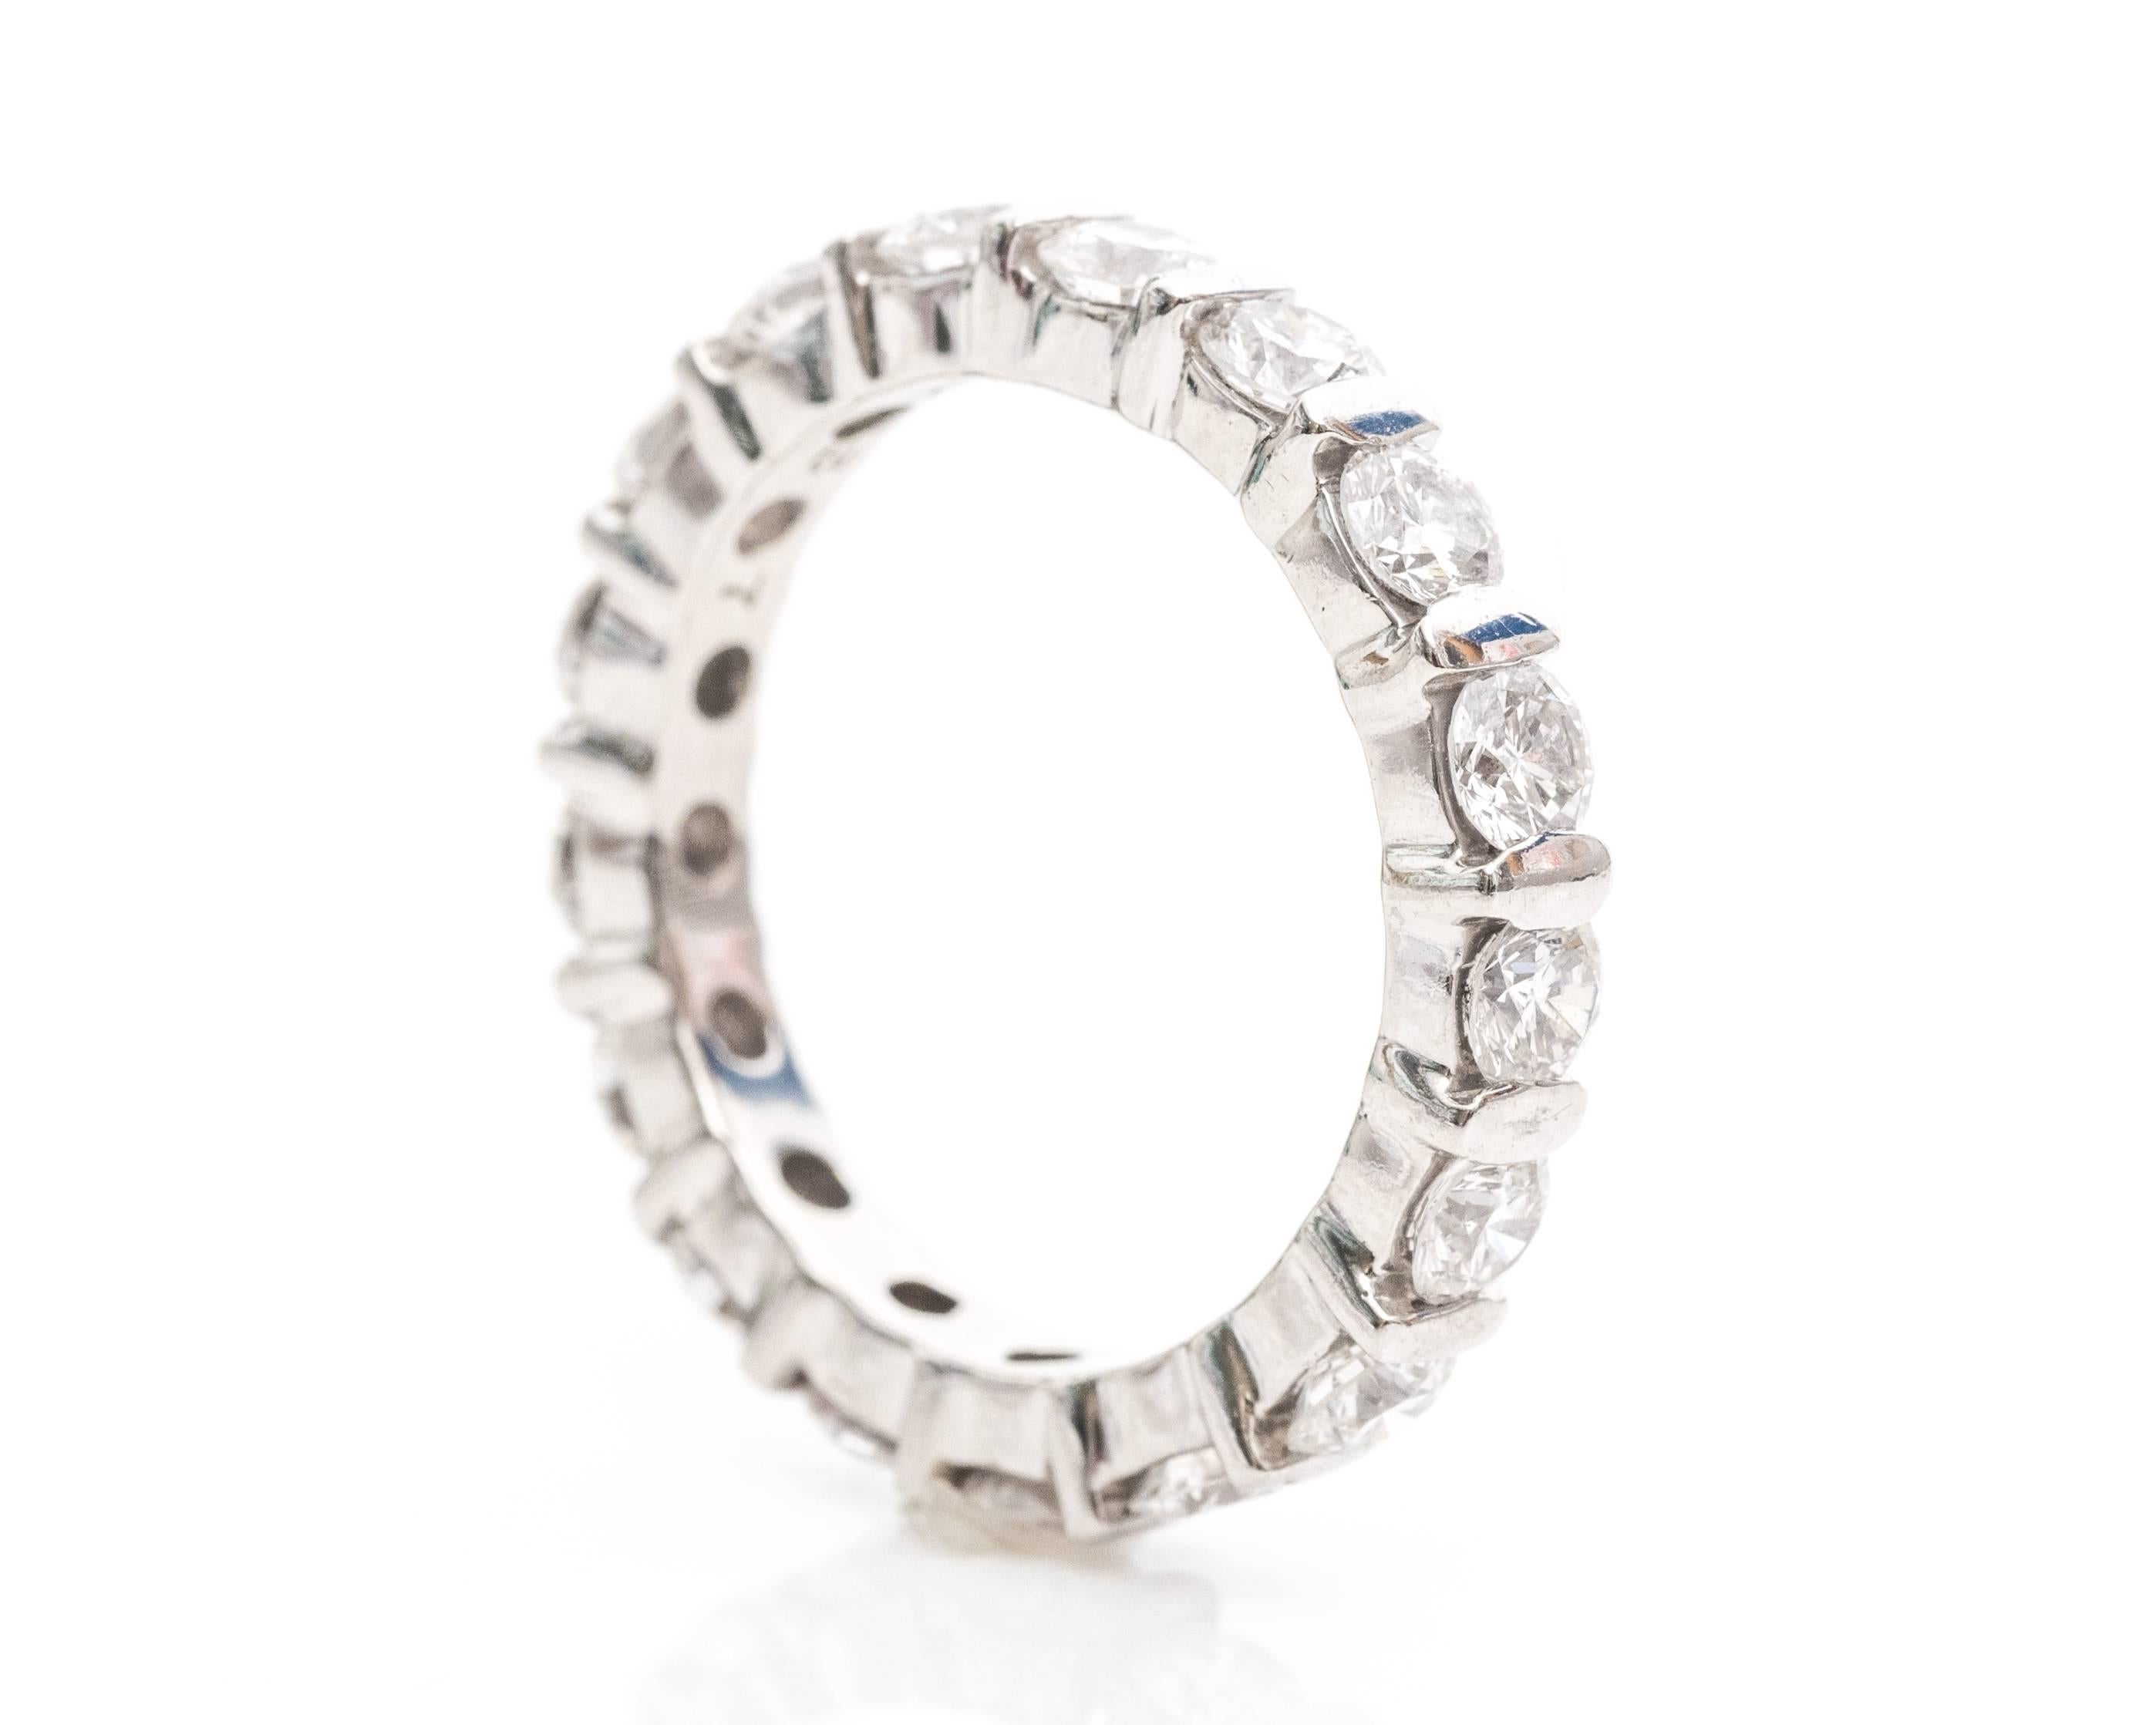 Diamond Eternity Band

Made by designer Kwiat

This eternity band has 17 diamonds along the frame. The diamonds are placed in bar settings for an effortless look.

This platinum band is from the 1990s.

 
Diamond Details:
Shape: Round